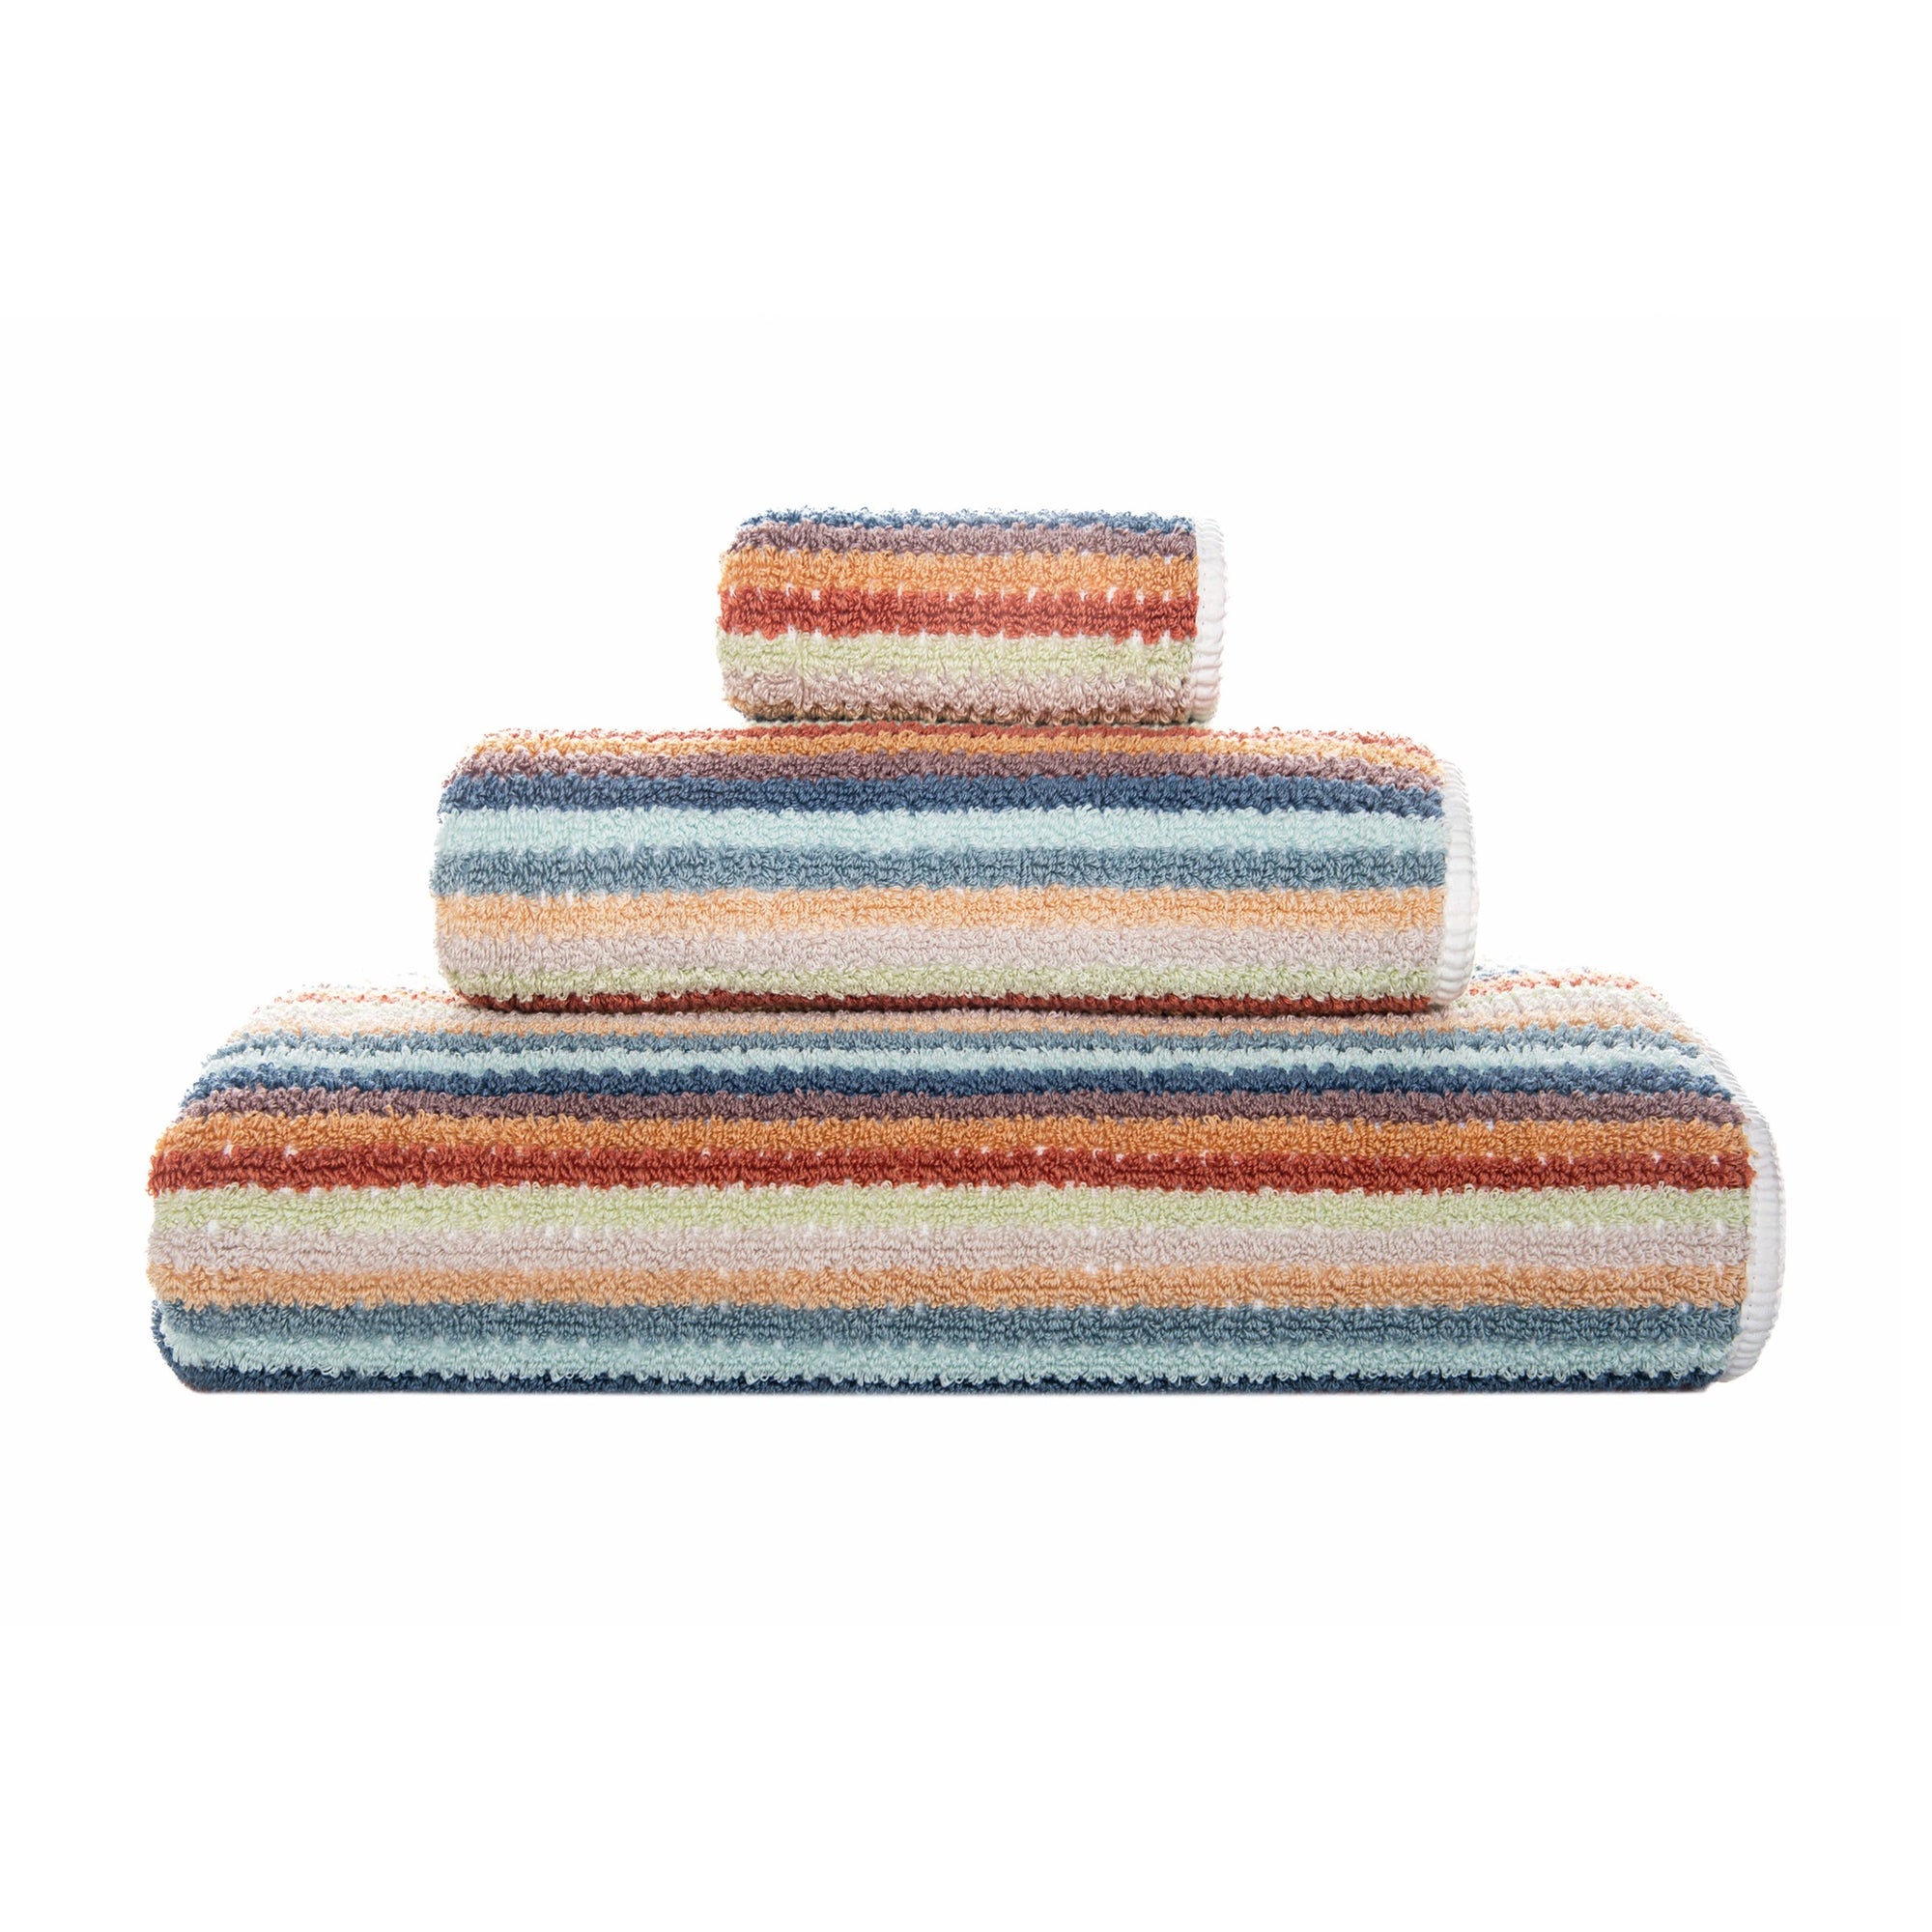 Stack of Graccioza Lollypop Bath Towels Against White Background in Color Terracota